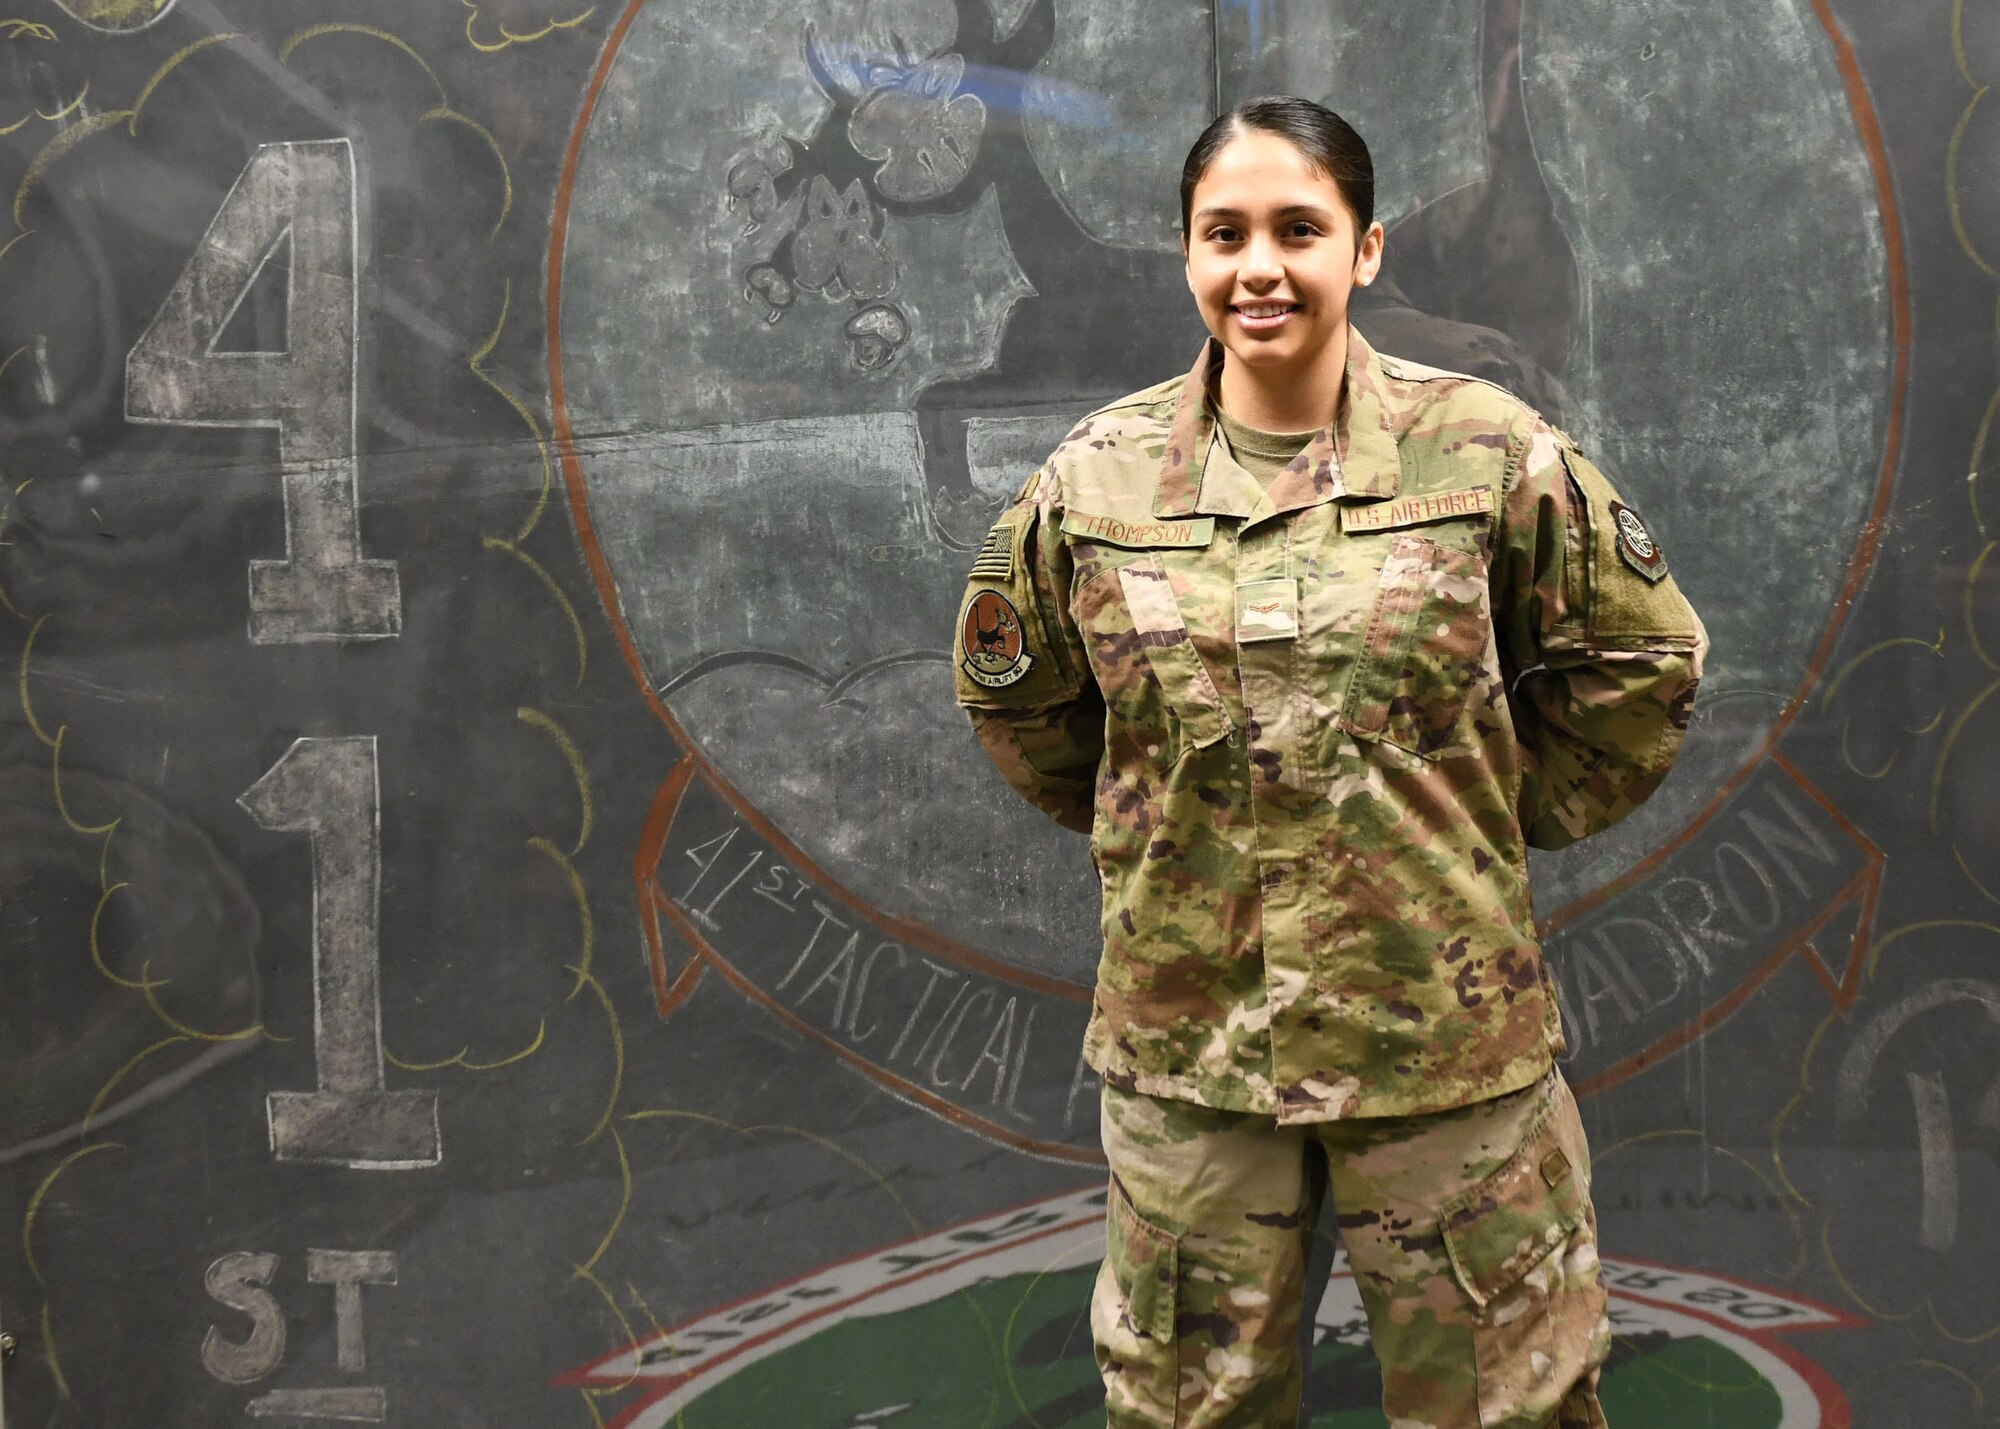 Airman 1st Class Chellsea Thompson, 41st Airlift Squadron aviation resource management, is recognized as the Combat Airlifter of the Week at Little Rock Air Force Base.